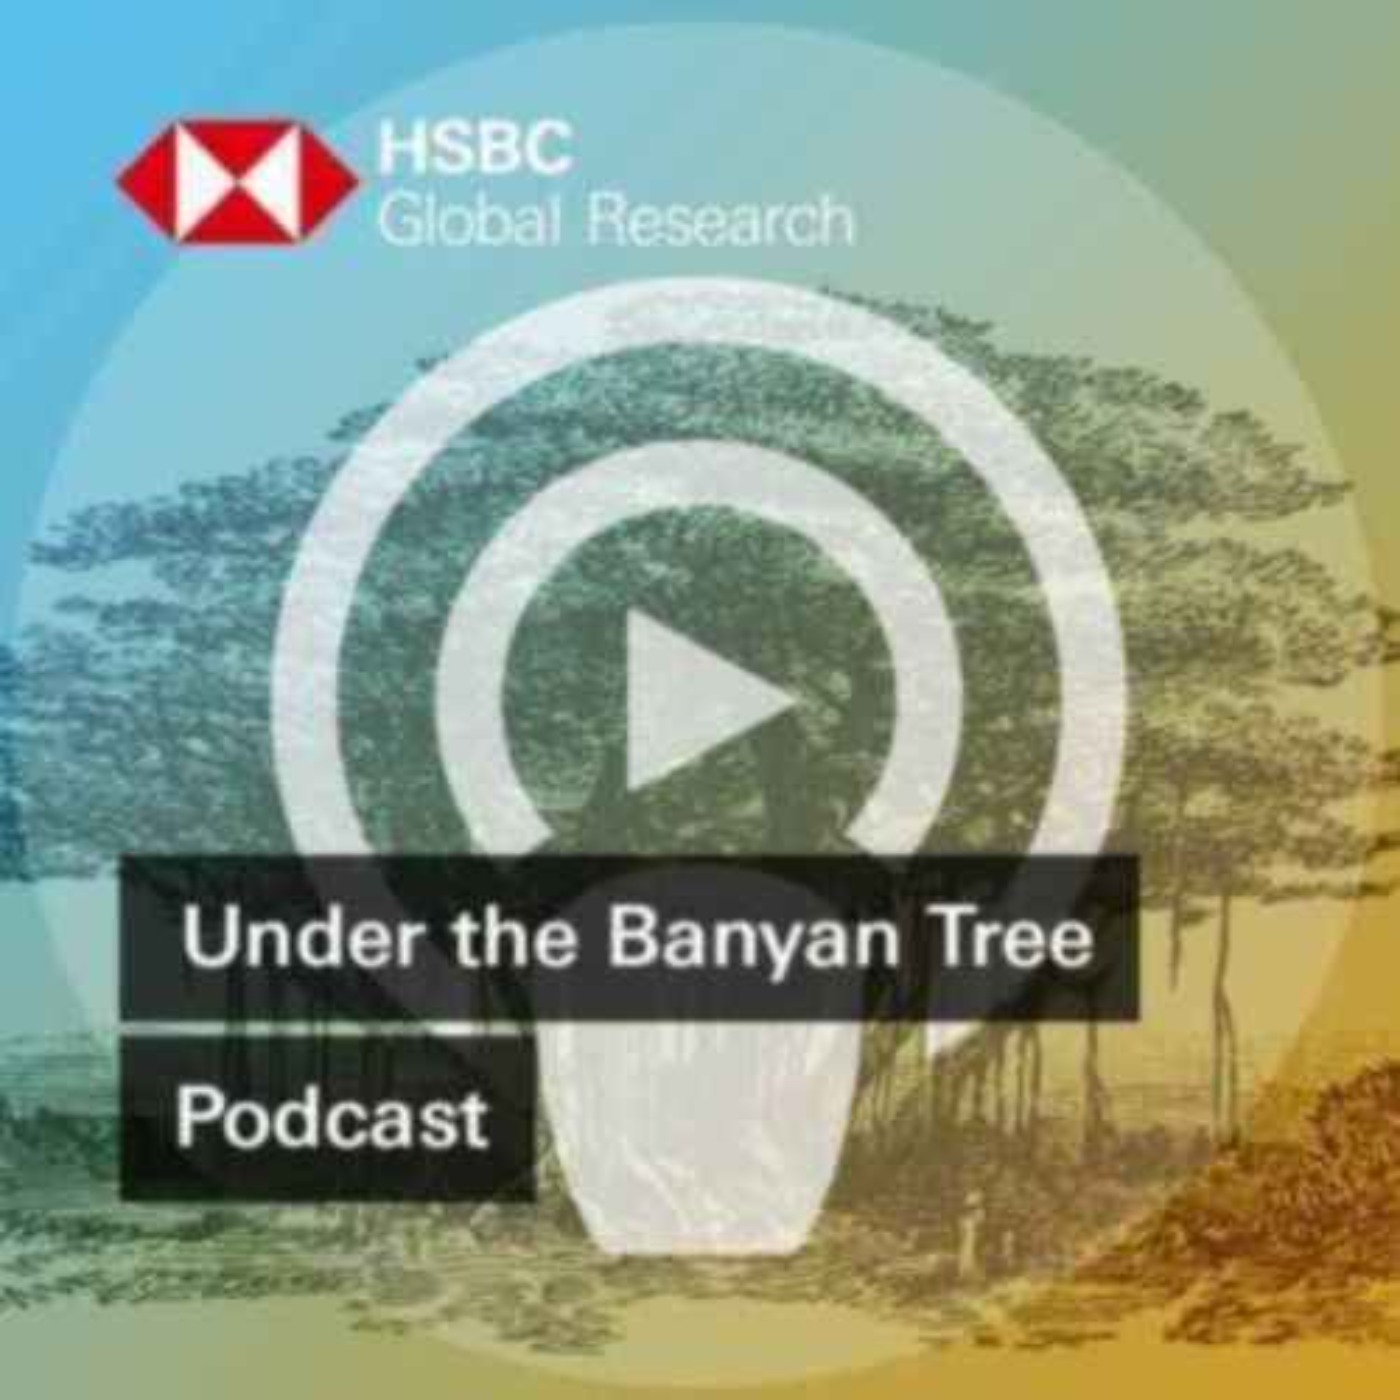 Under the Banyan Tree – A new era for the Japanese yen?